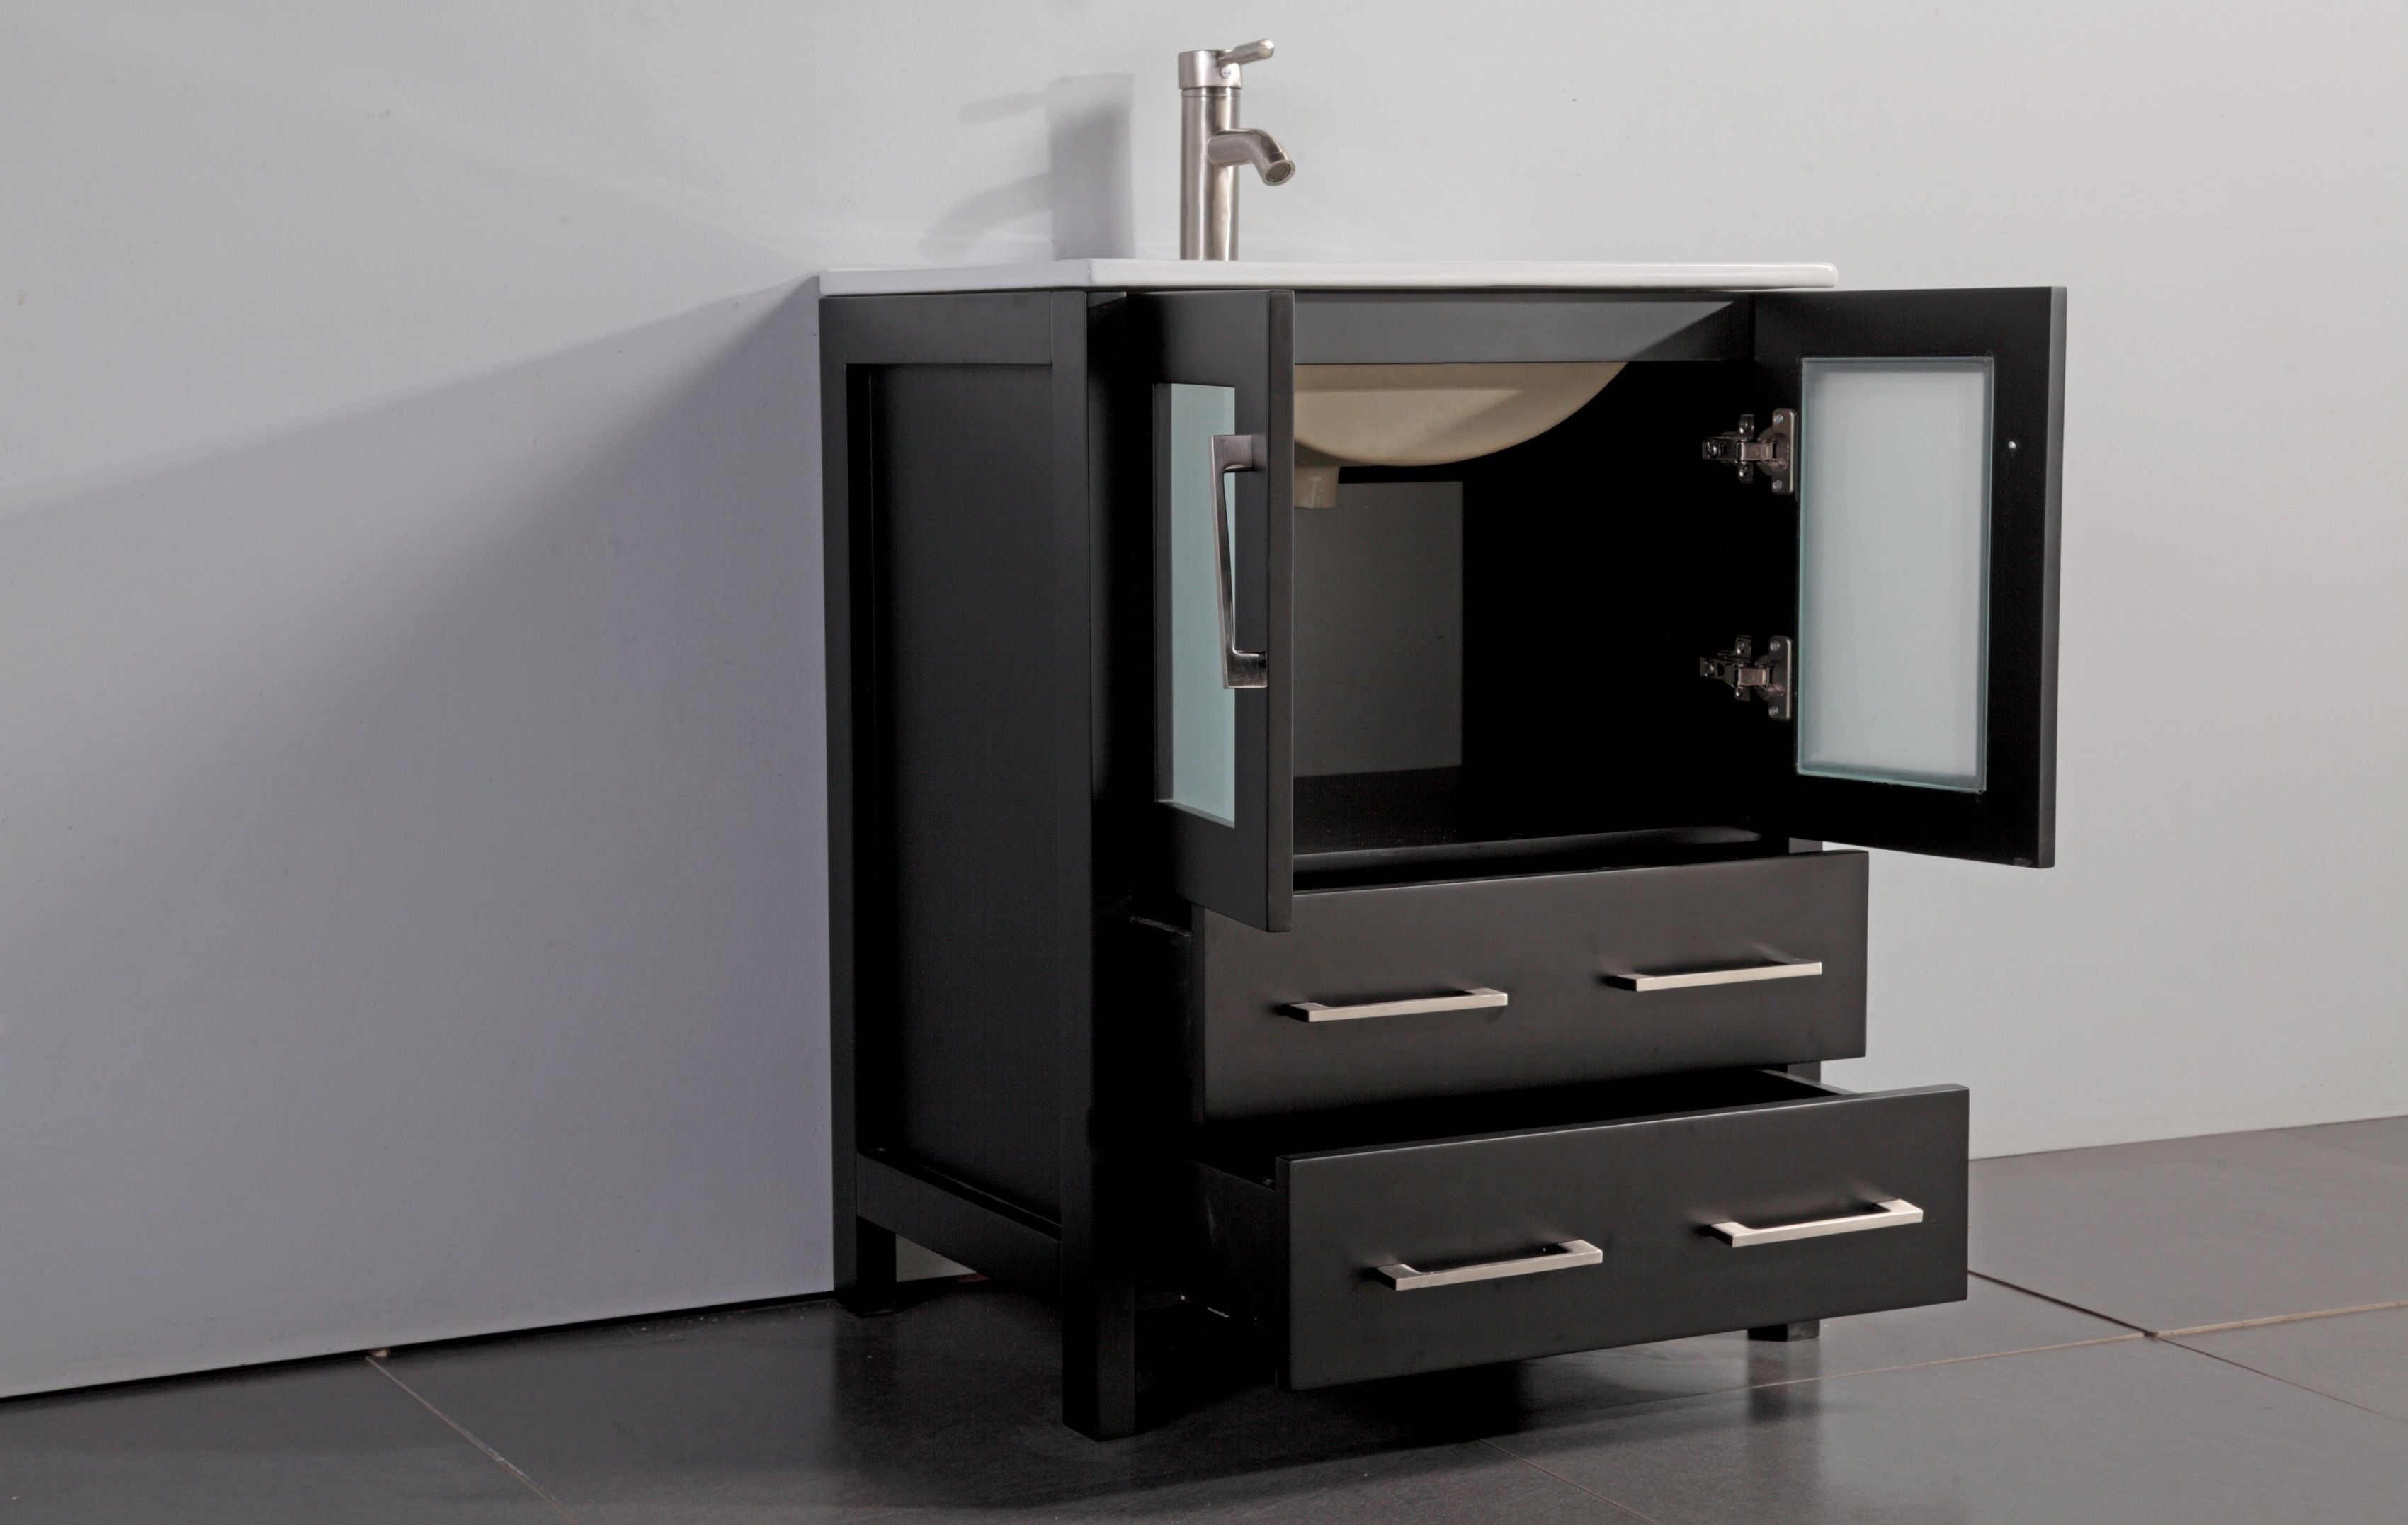 Vanity Art - London 72" Double Sink Bathroom Vanity Set with Sink and Mirrors - 2 Side Cabinets - Bhdepot 